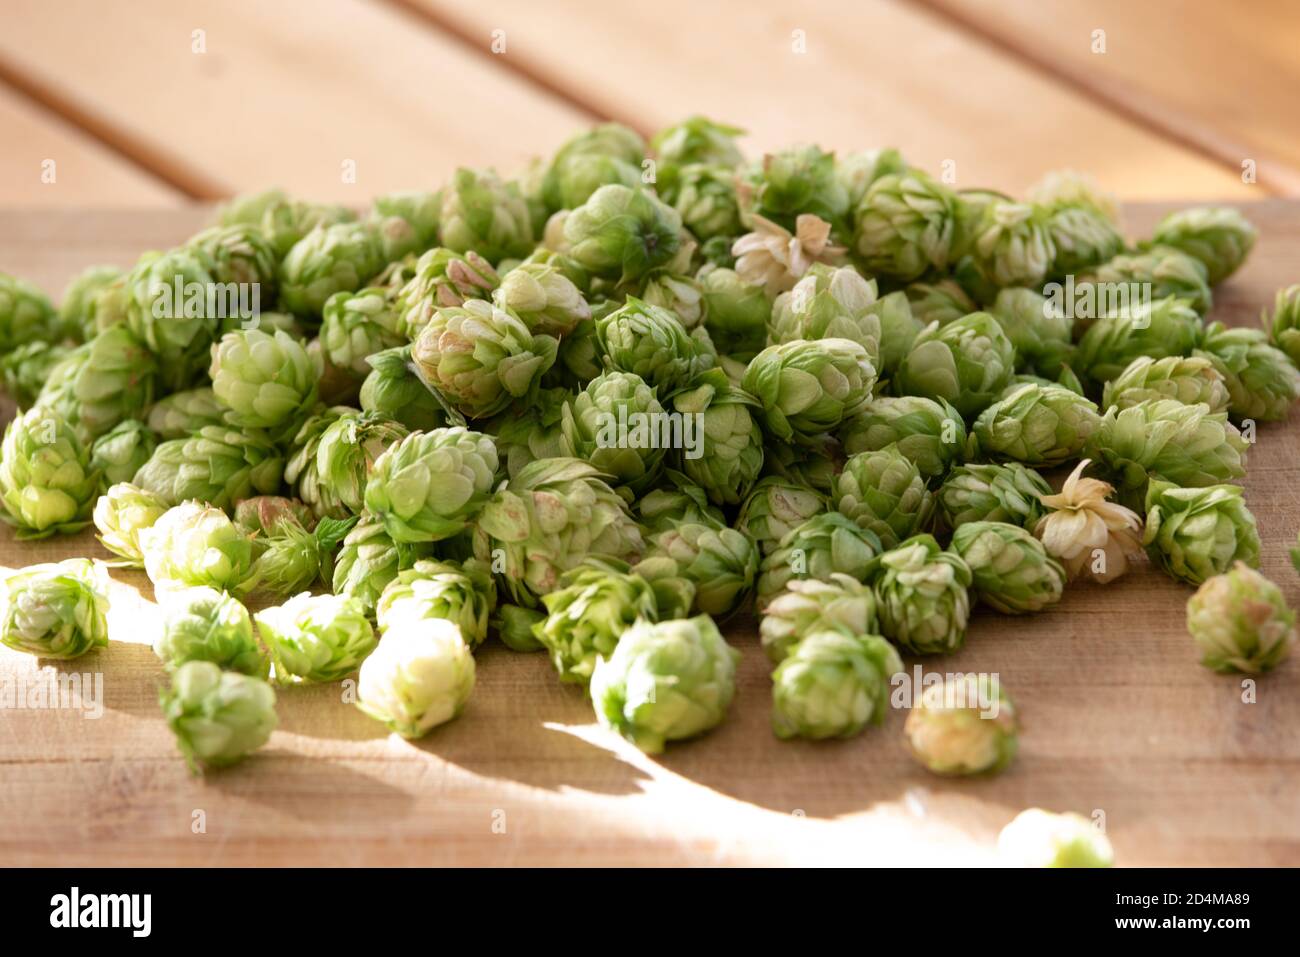 Hops are one of the main ingredients of beer. Stock Photo